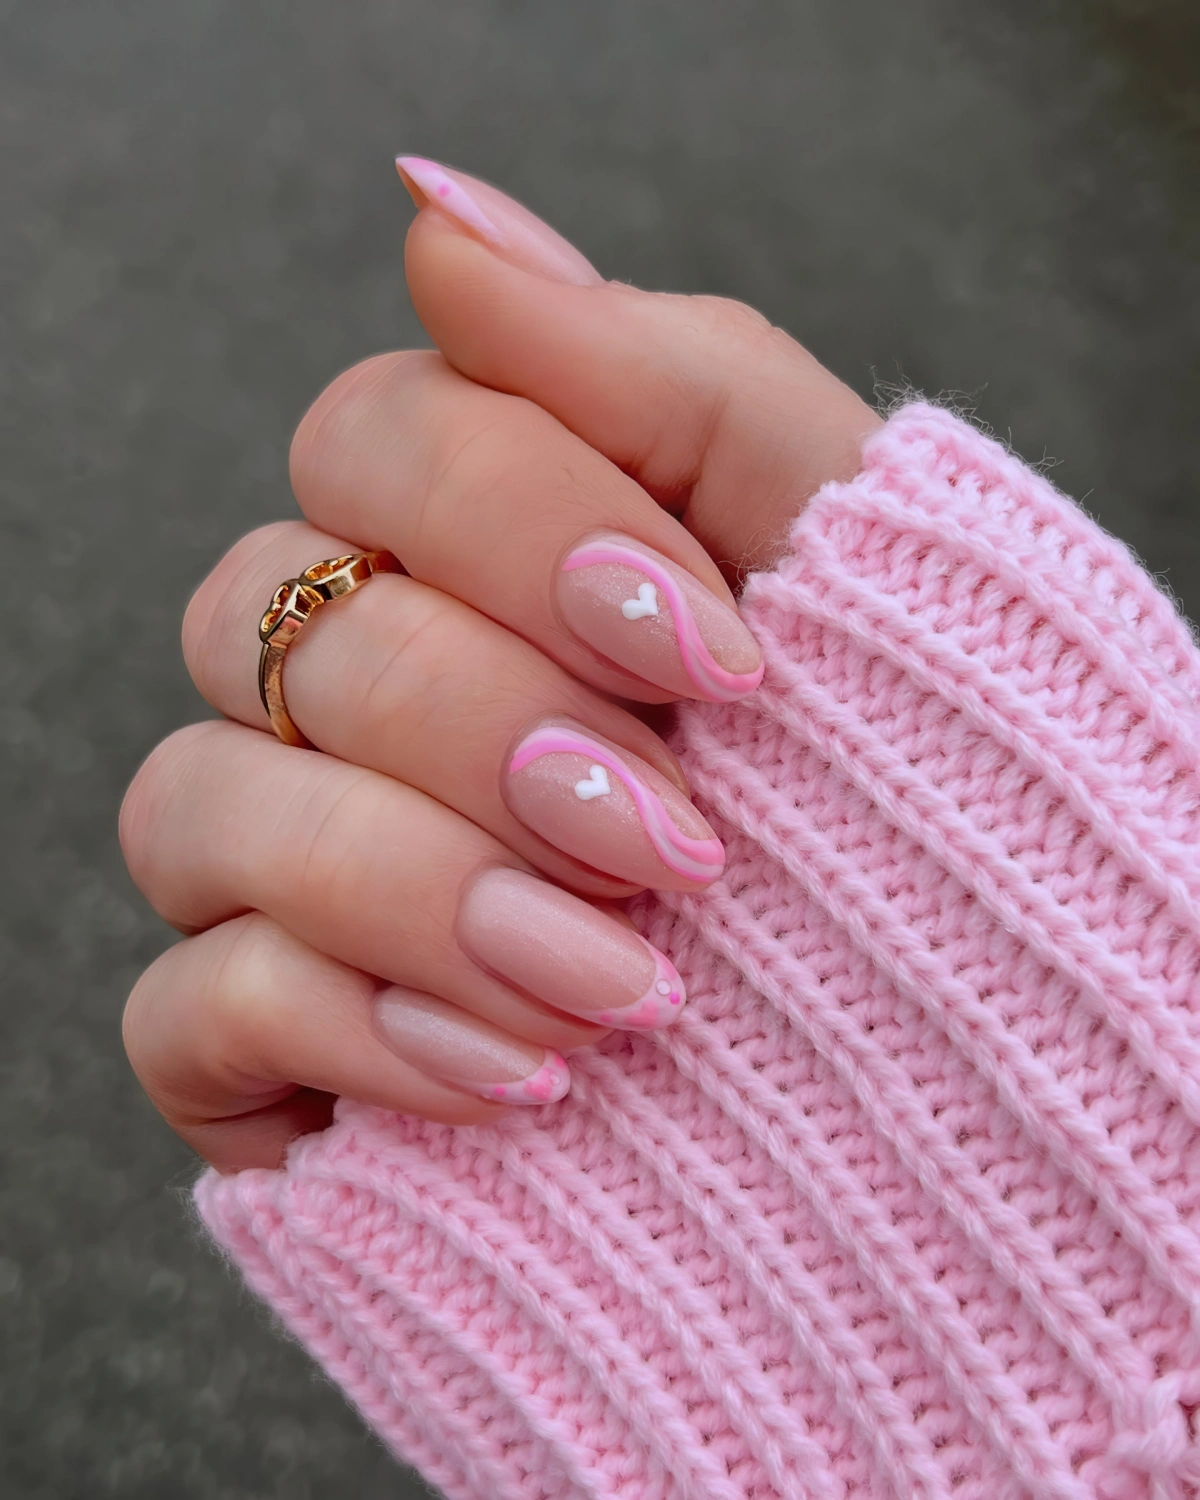 rose pull femme ongles amour dessin coeur blanc